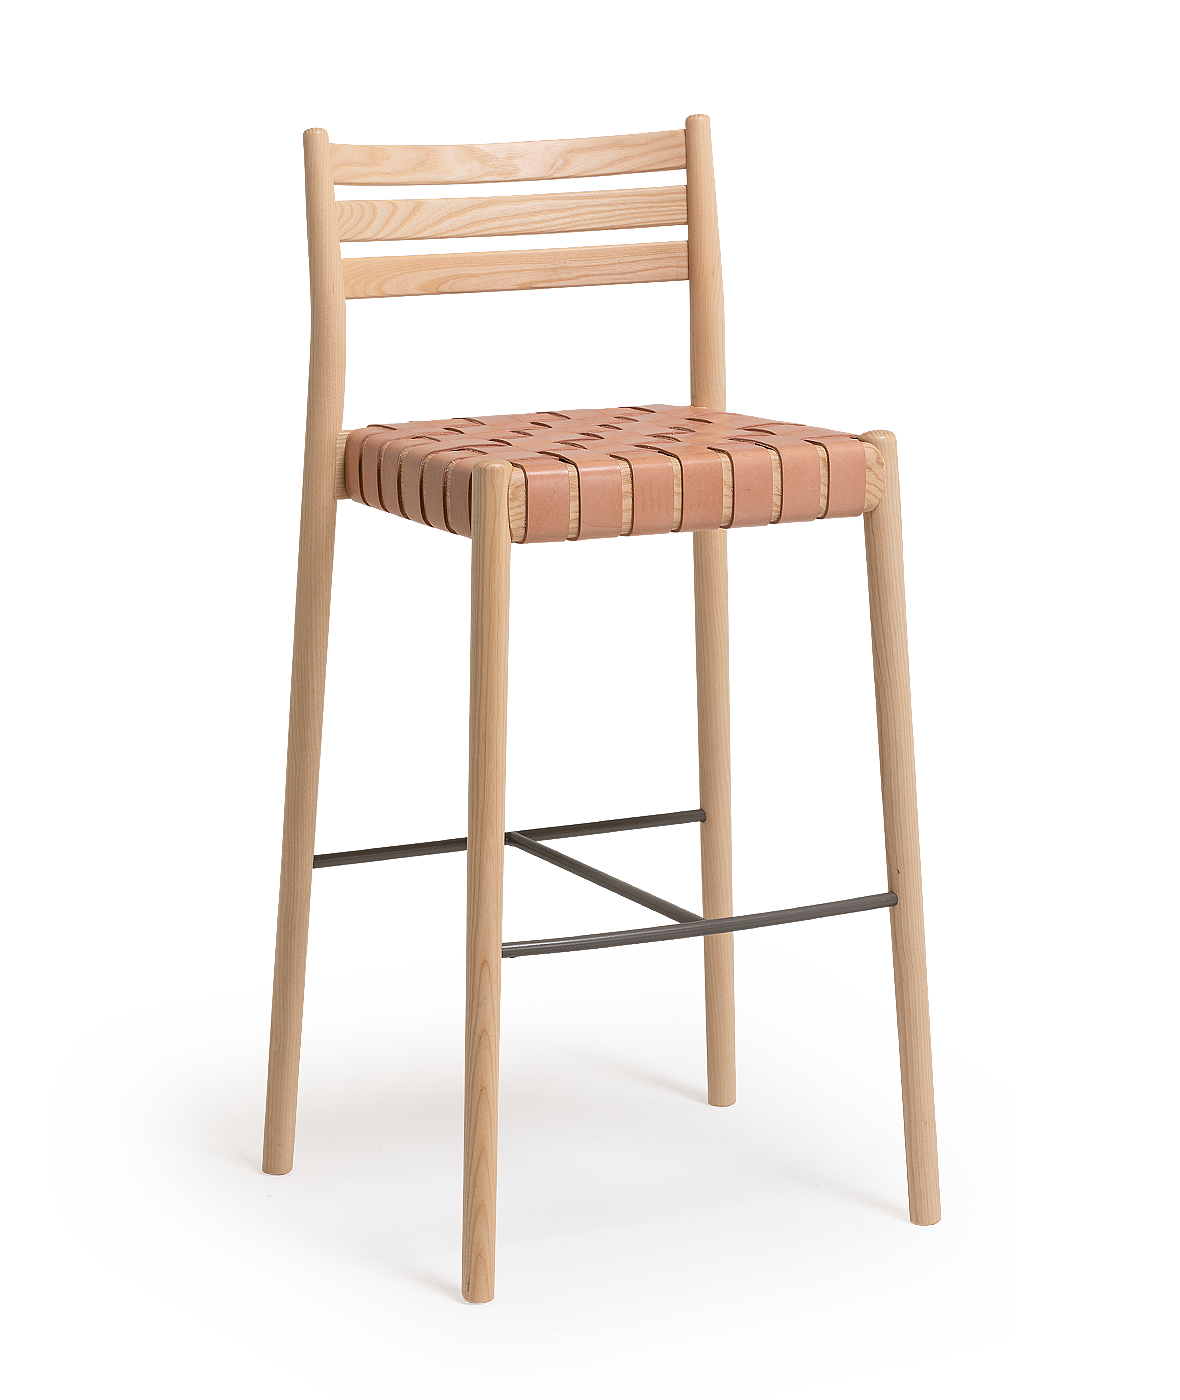 Vergés - Bogart Stool with backrest and woven cord seat